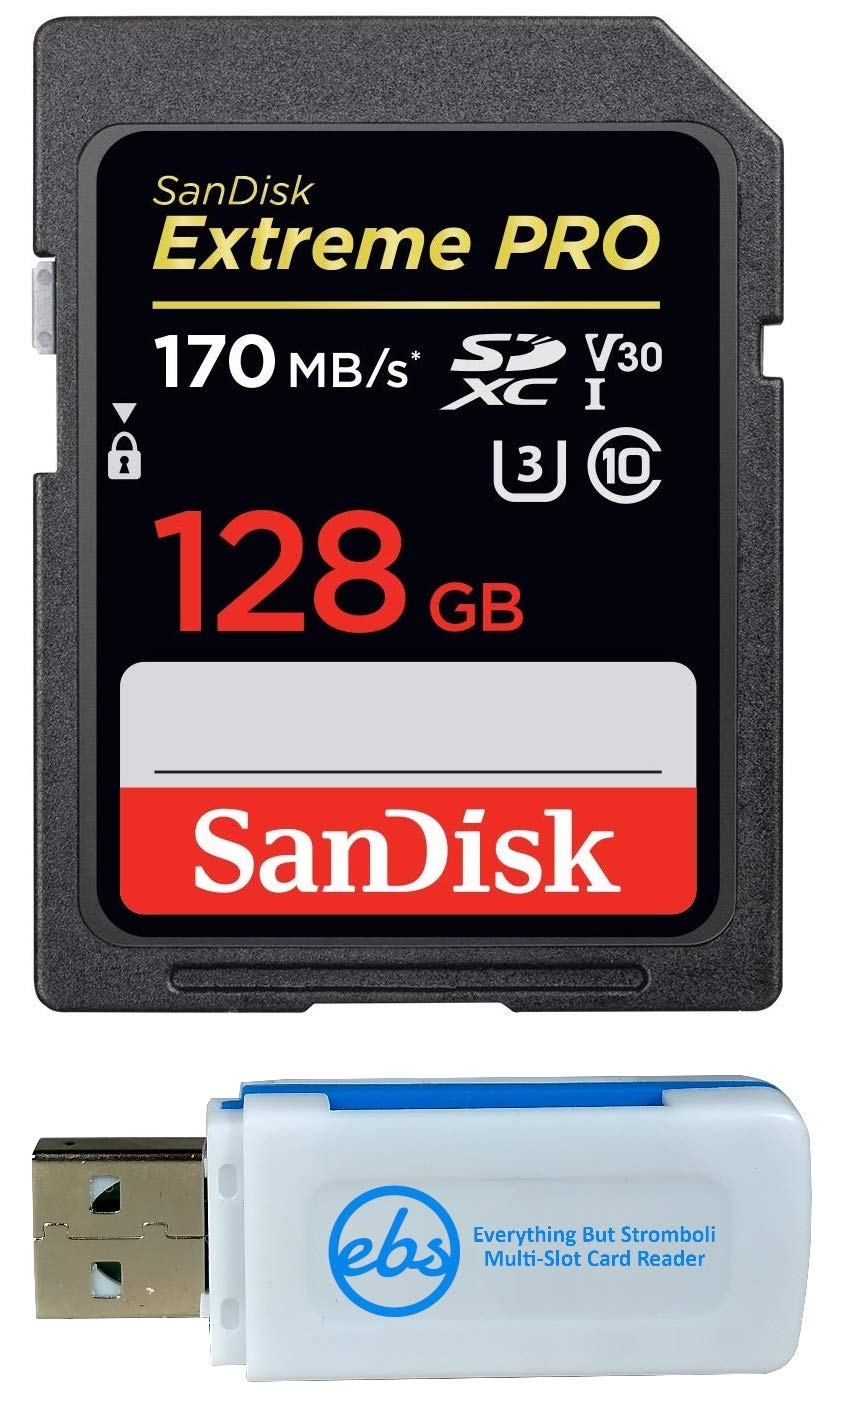 SanDisk 128GB SDXC Extreme Pro Memory Card Bundle Works with Fujifilm X-T3, X-T20, X-T2, X-H1 Mirrorless Camera 4K V30 (SDSDXXY-128G-GN4IN) Plus (1) Everything But Stromboli (TM) Combo Card Reader